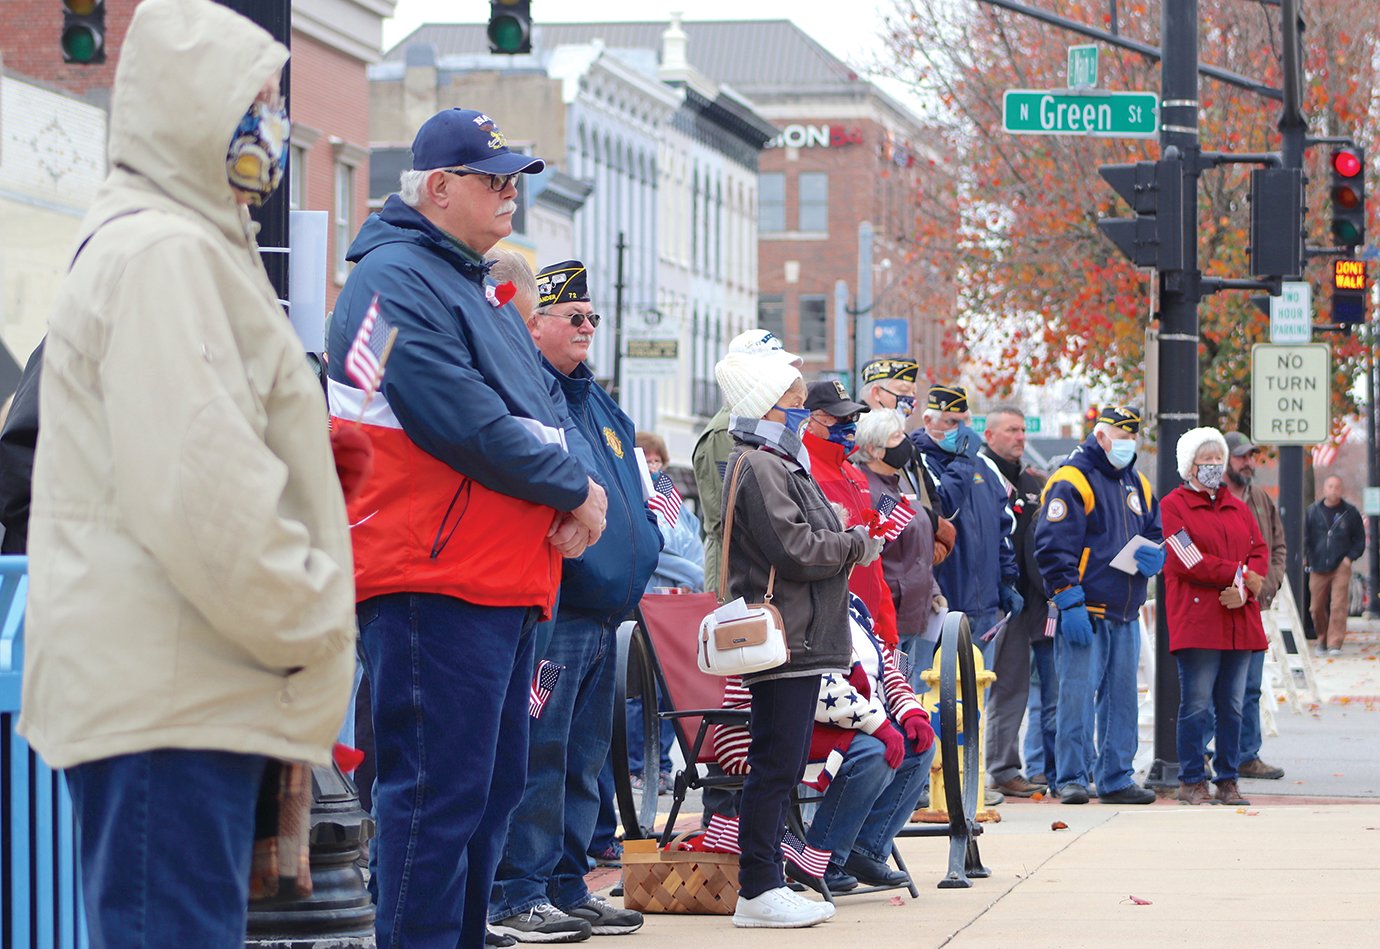 Dozens braved the cold, windy weather Wednesday to show appreciation for U.S. military veterans during the city's annual Veterans Day ceremony.